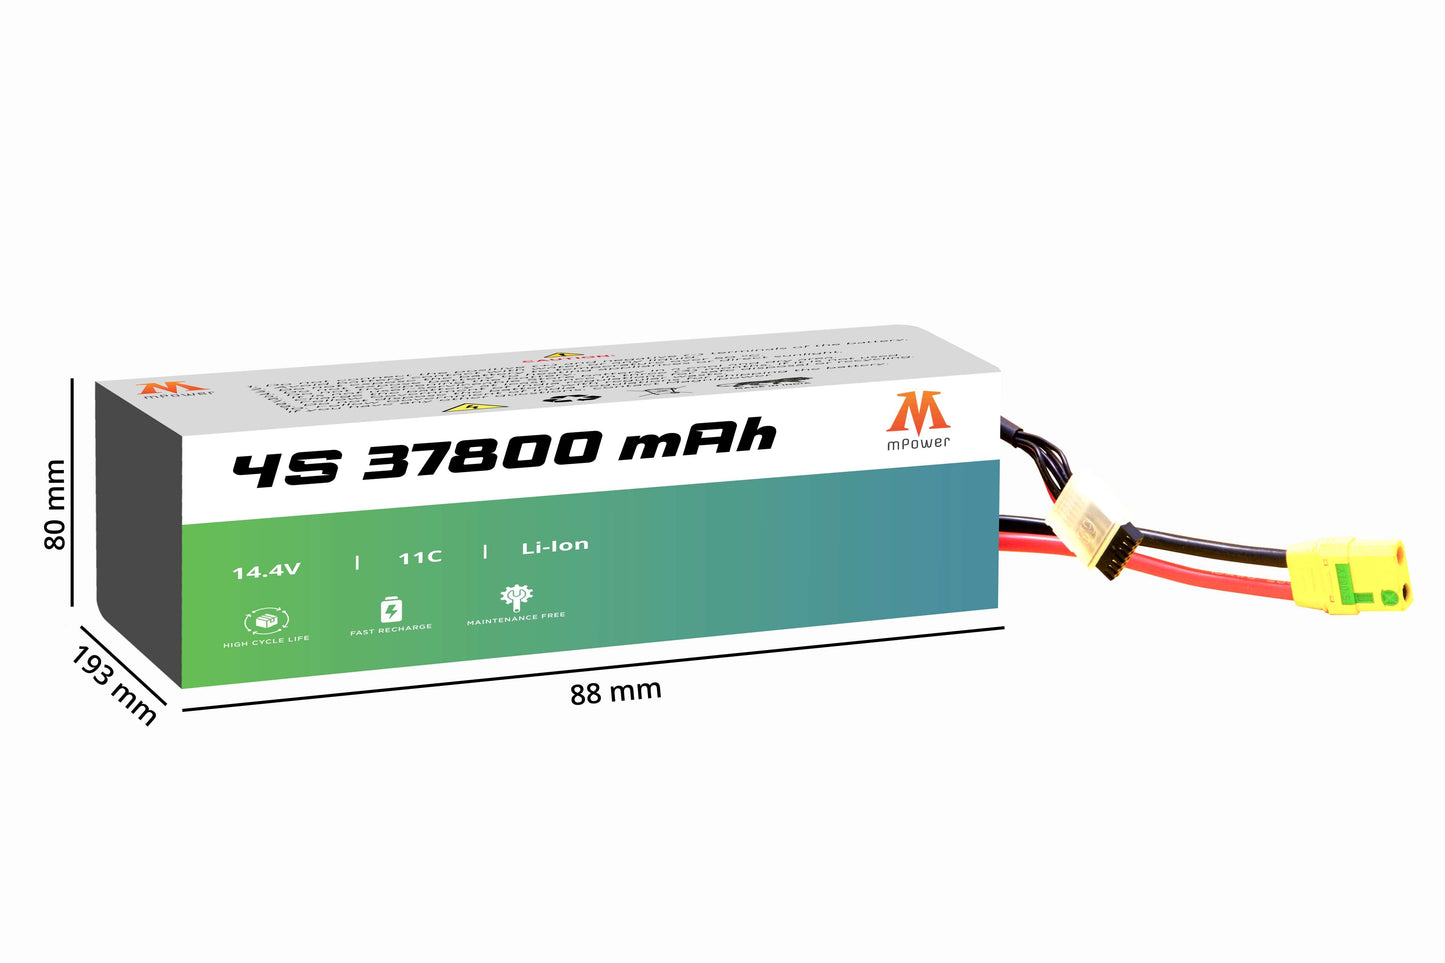 mPower 4S 37800mAh Lithium-Ion Battery for Survey Drones